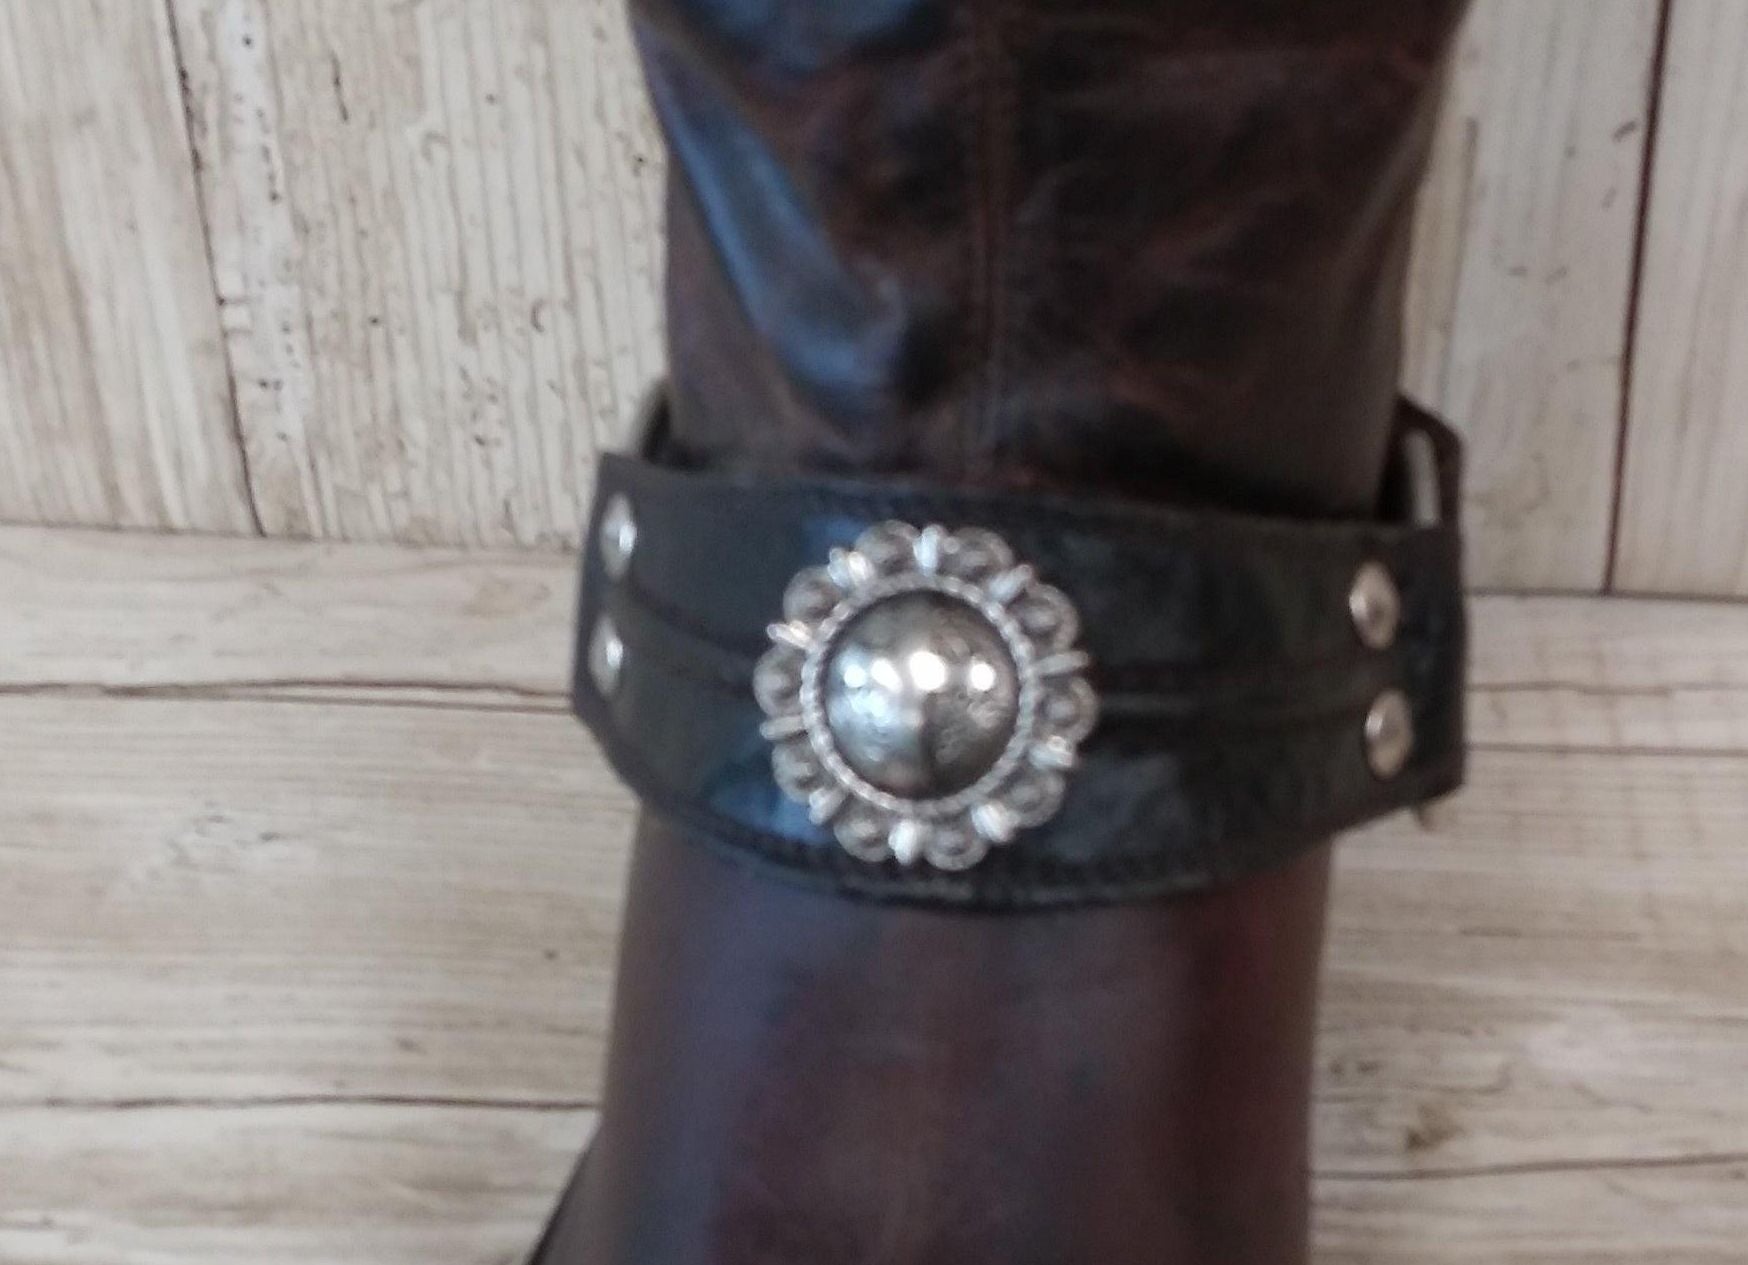 Boot Bracelet Decoration (Single) bw84 handcrafted from cowboy boots. Shop Apparel & Accessories at and buy the best boot accents, boot accessory, boot bling, boot bracelet, boot decor, boot jewelry, boot wrap, cowboy boot bling, cowboy boot decor, cowgirl boot bling, decorate boots, ugg decoration, western boot decor at Chris Thompson Bags.